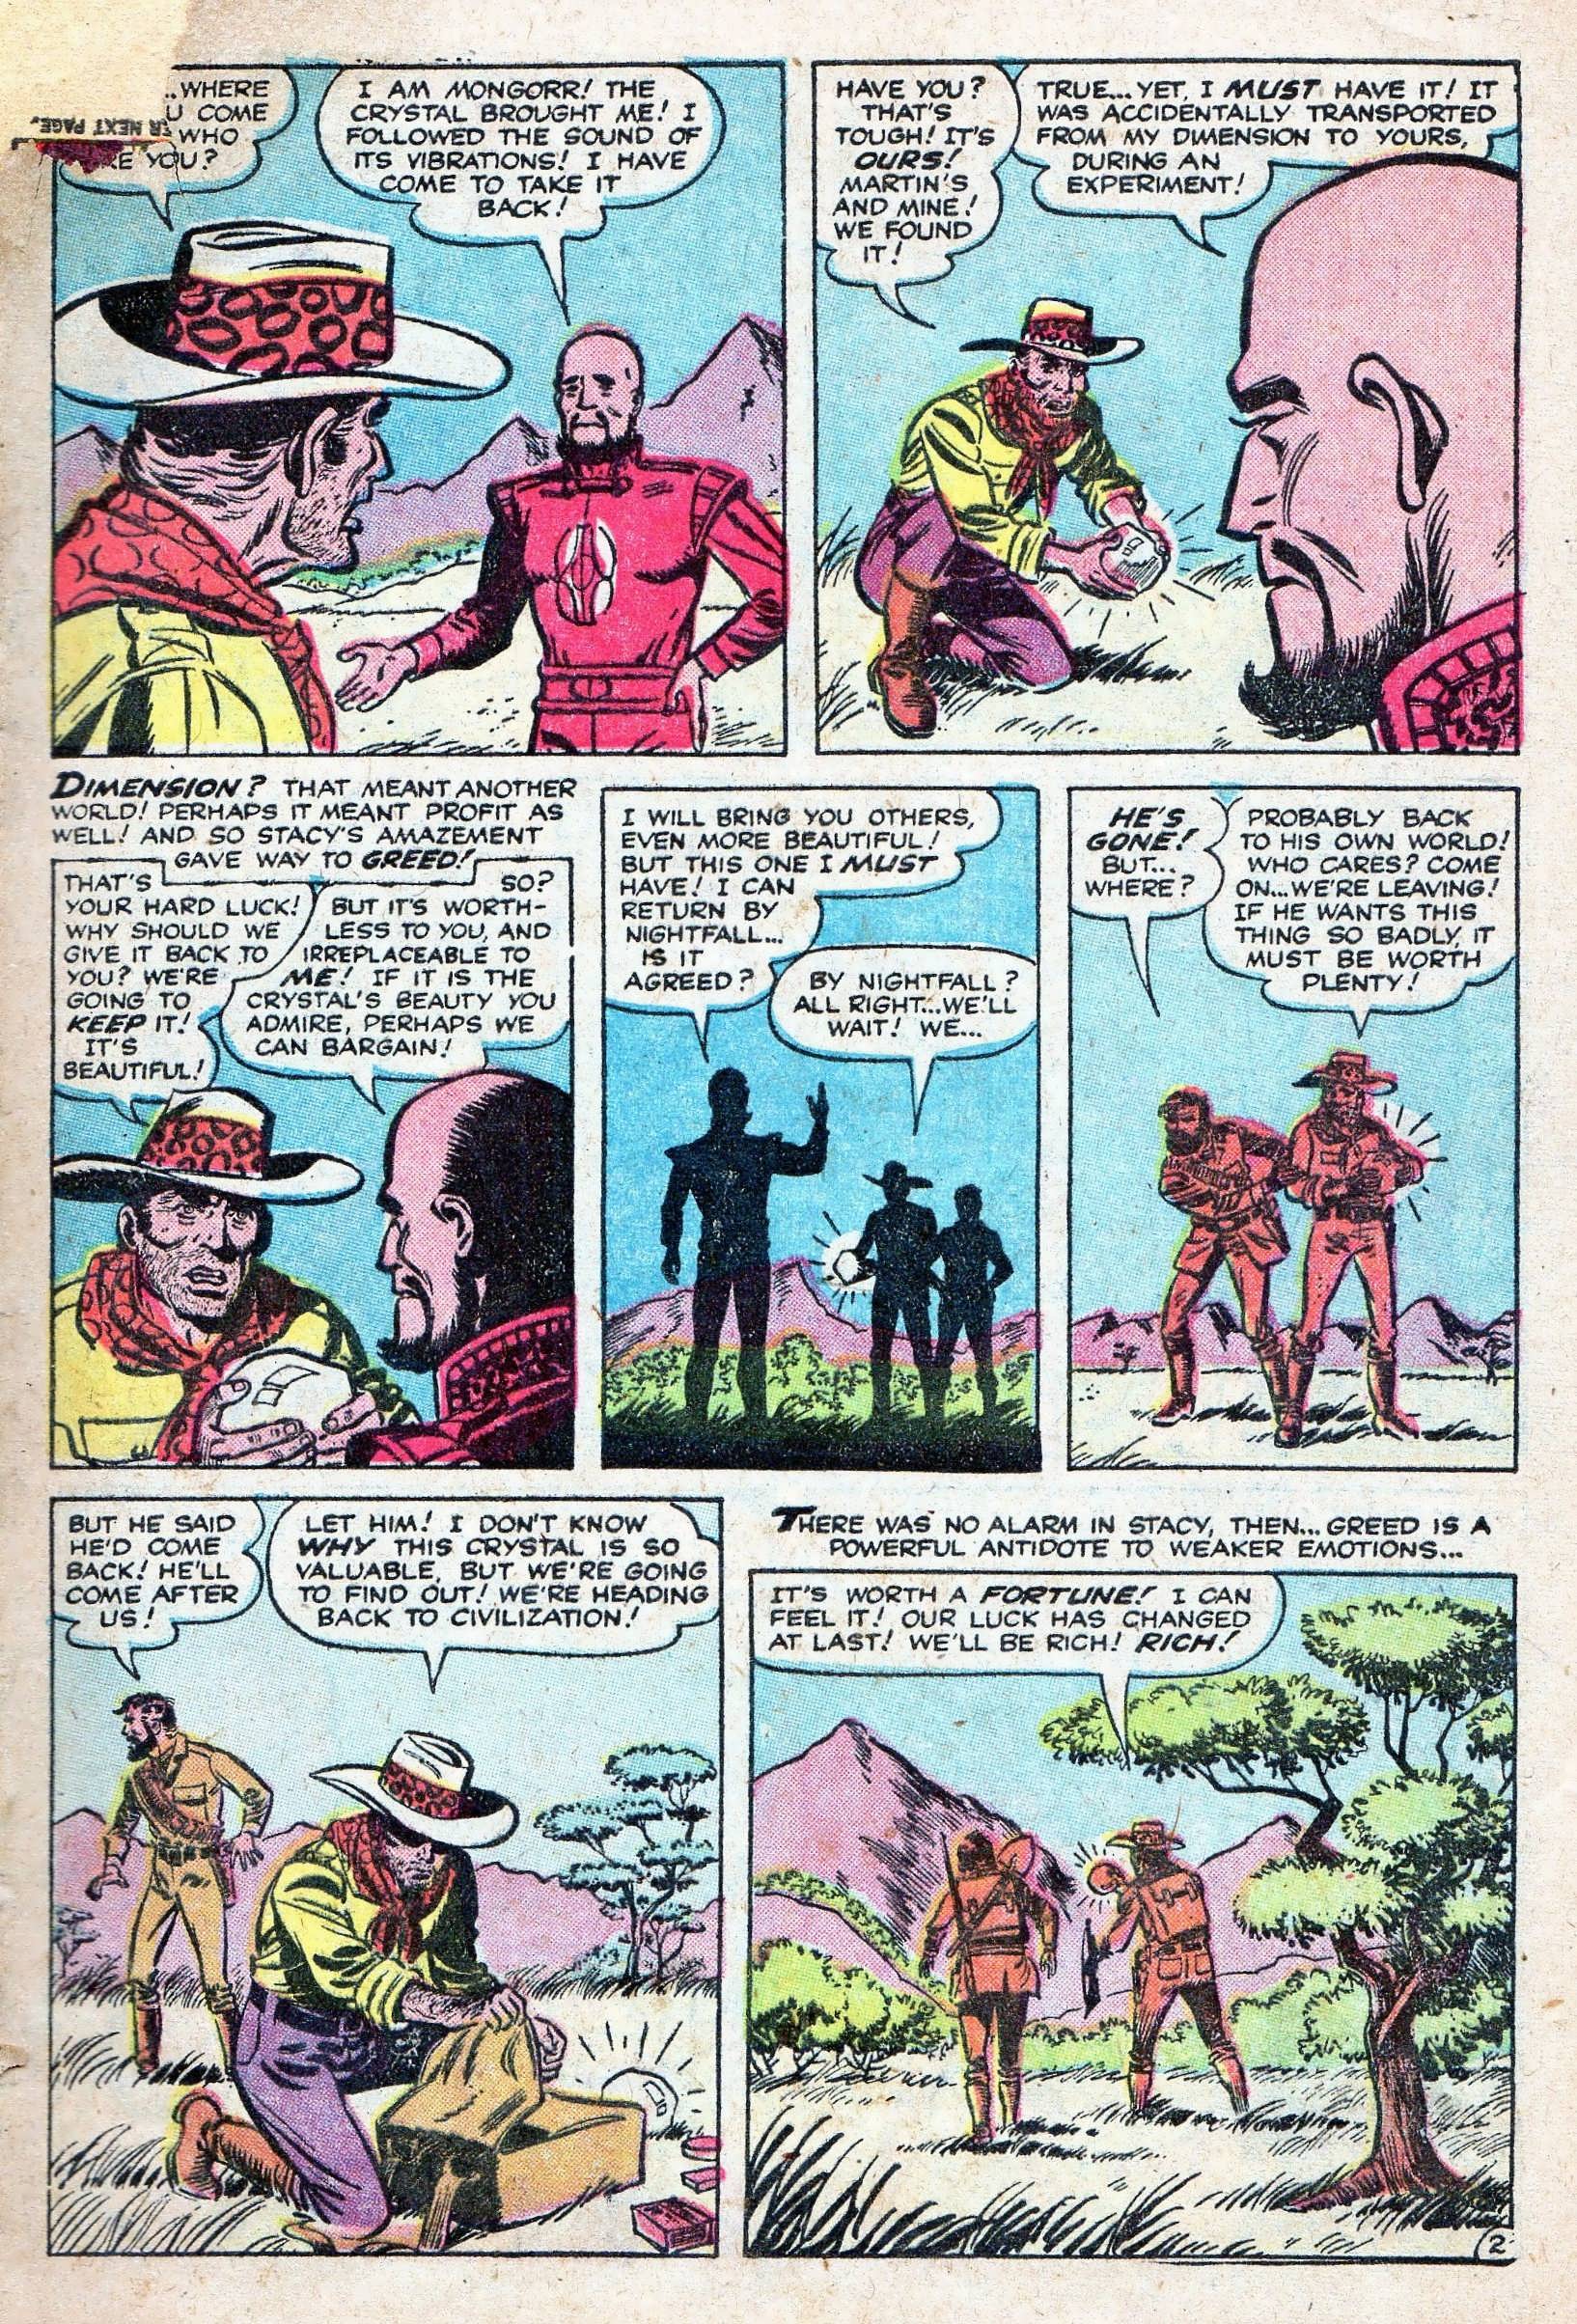 Marvel Tales (1949) 152 Page 12